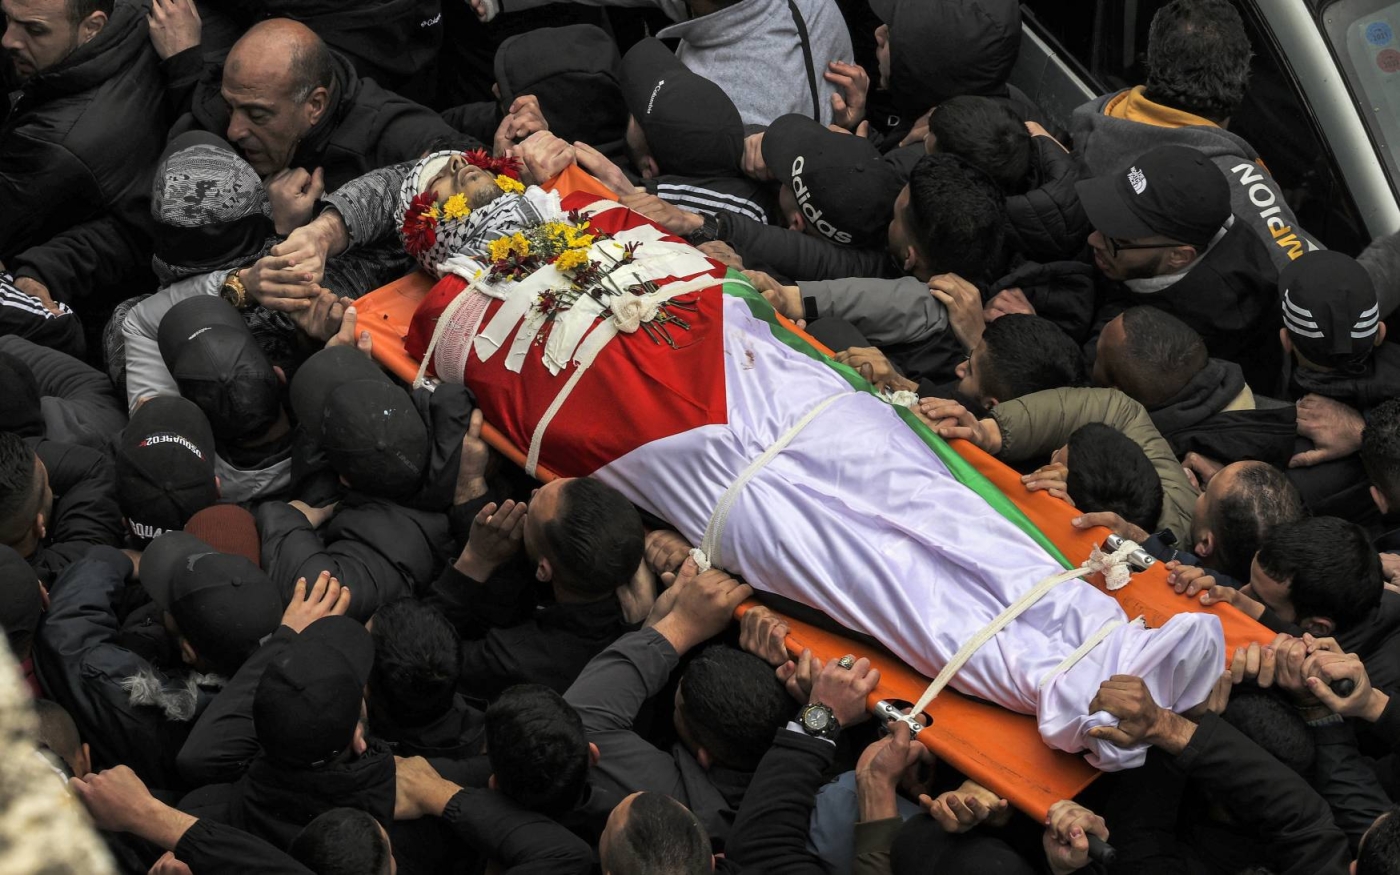 Mourners carry the body of Palestinian Alaa Shaham during his funeral at the Qalandia camp for Palestinian refugees south of Ramallah in the occupied West Bank on March 15, 2022